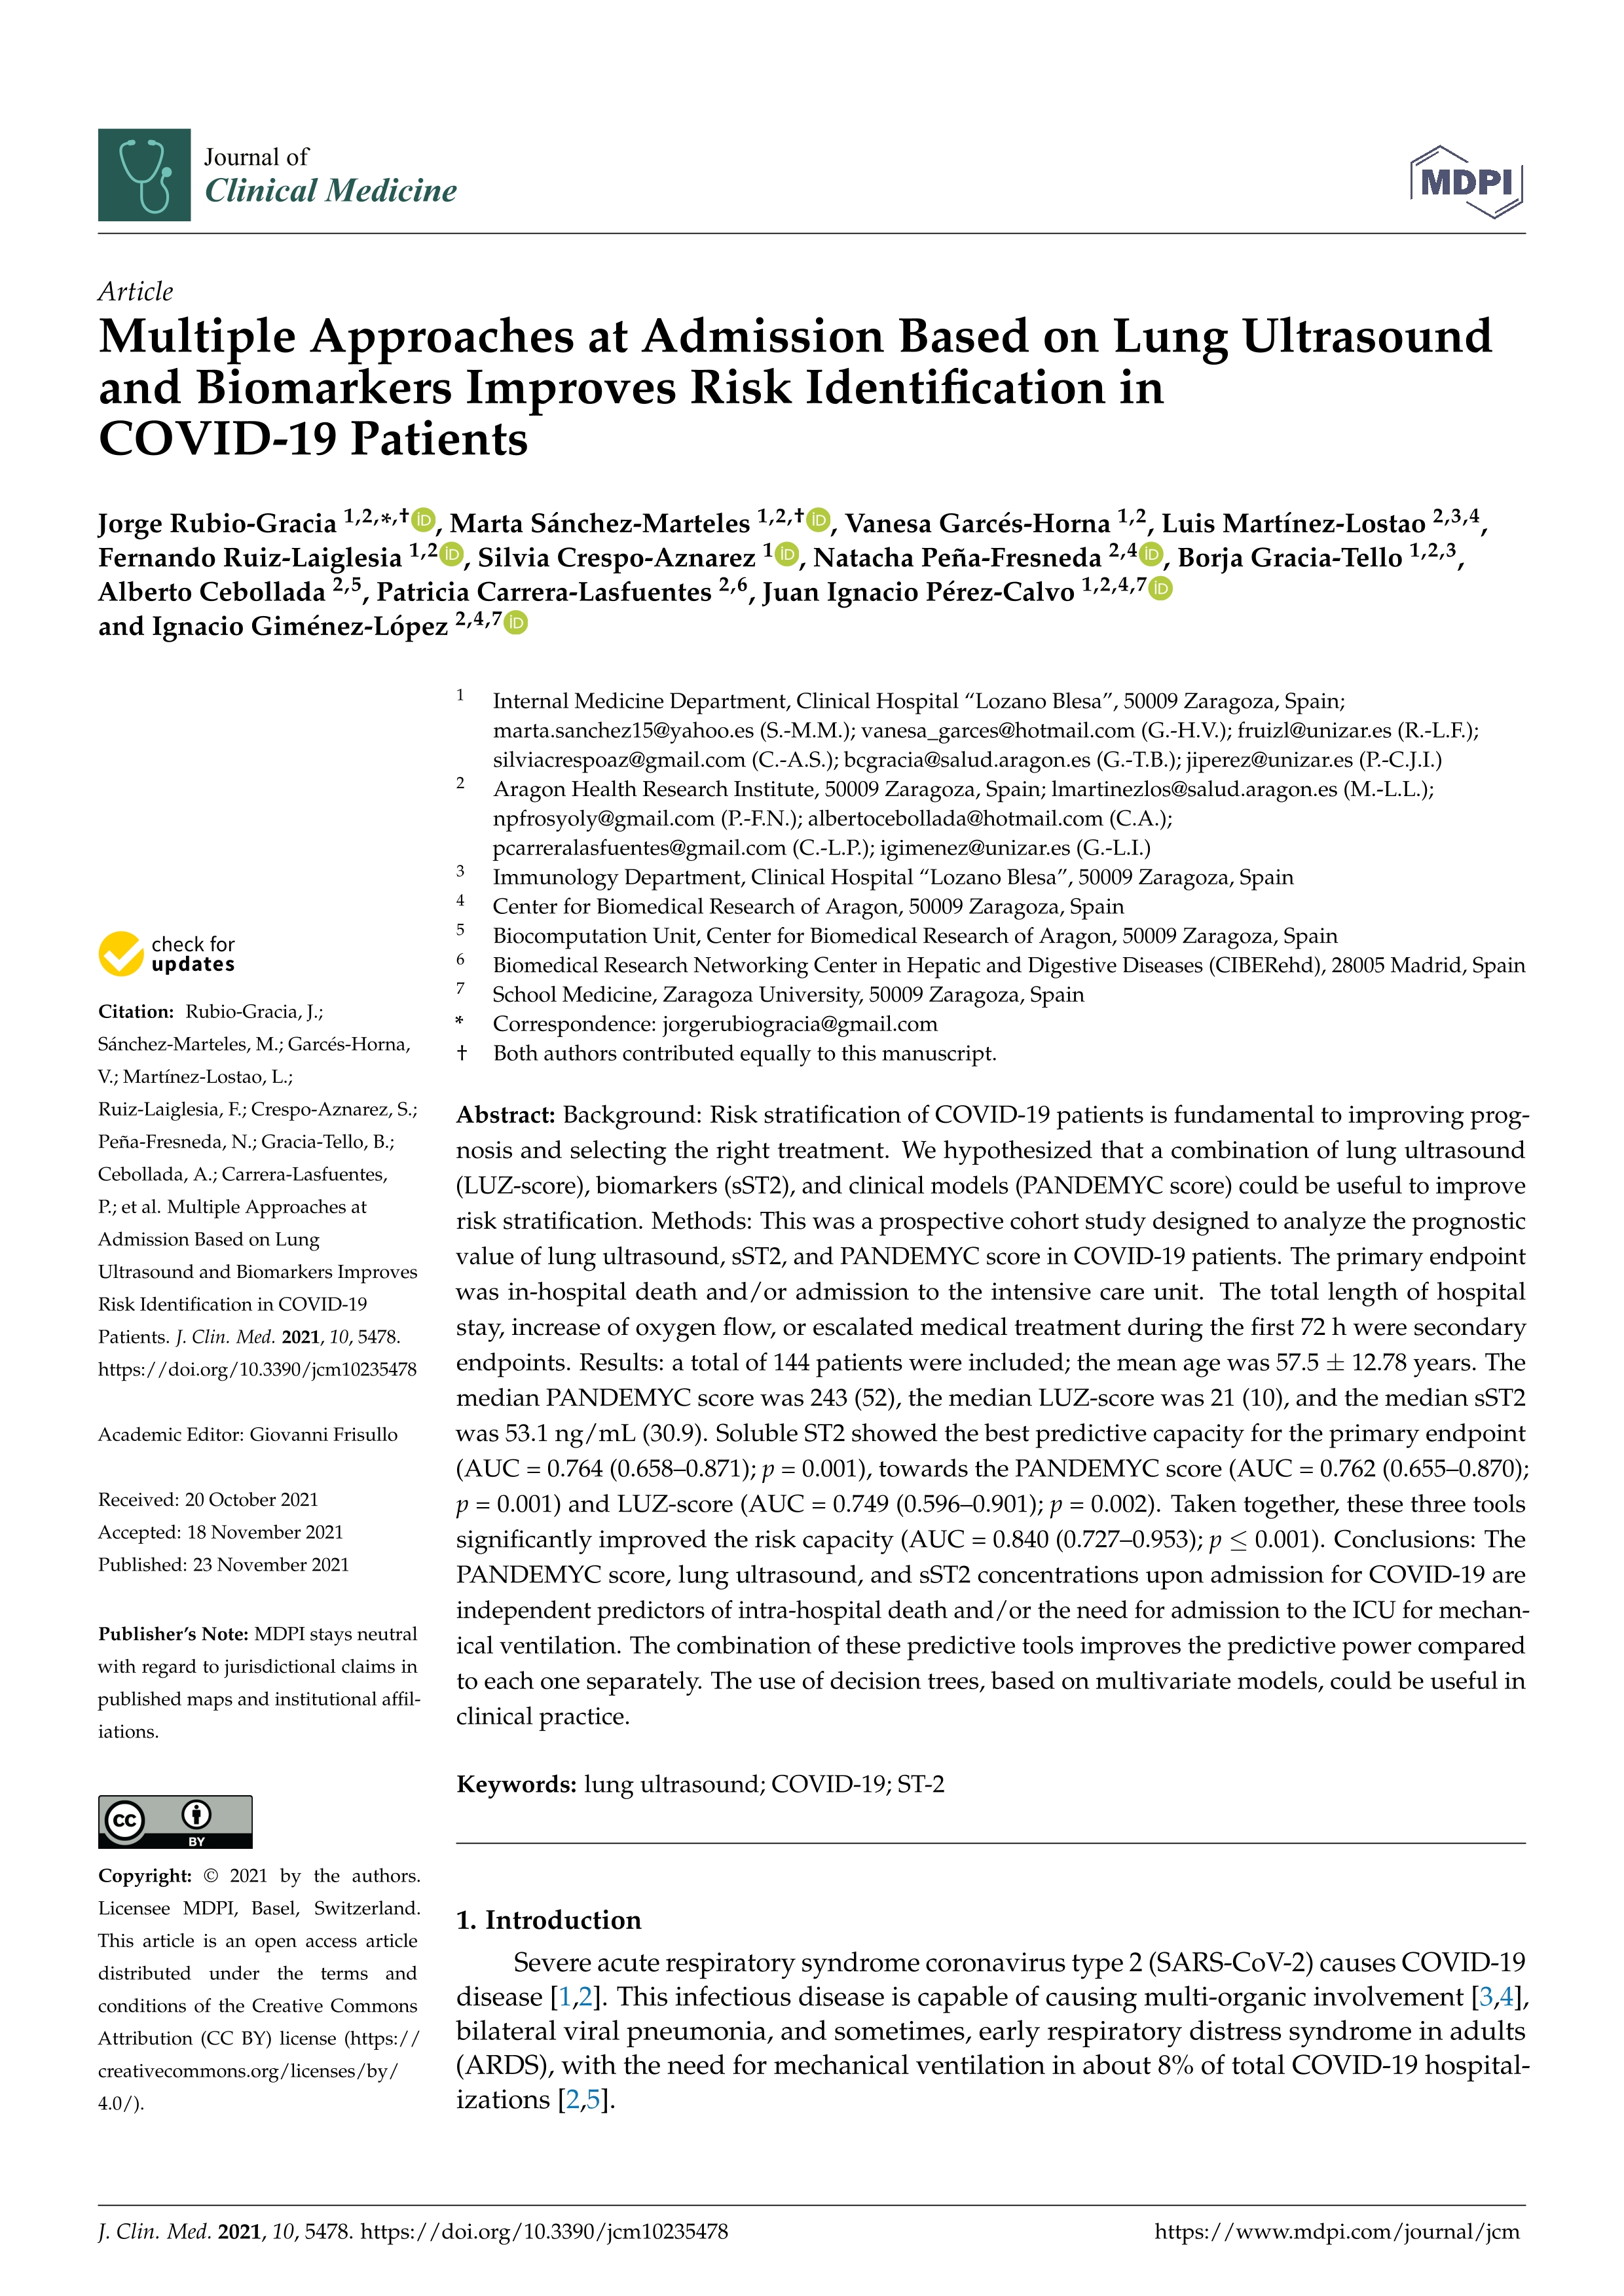 Multiple approaches at admission based on lung ultrasound and biomarkers improves risk identification in COVID-19 patients